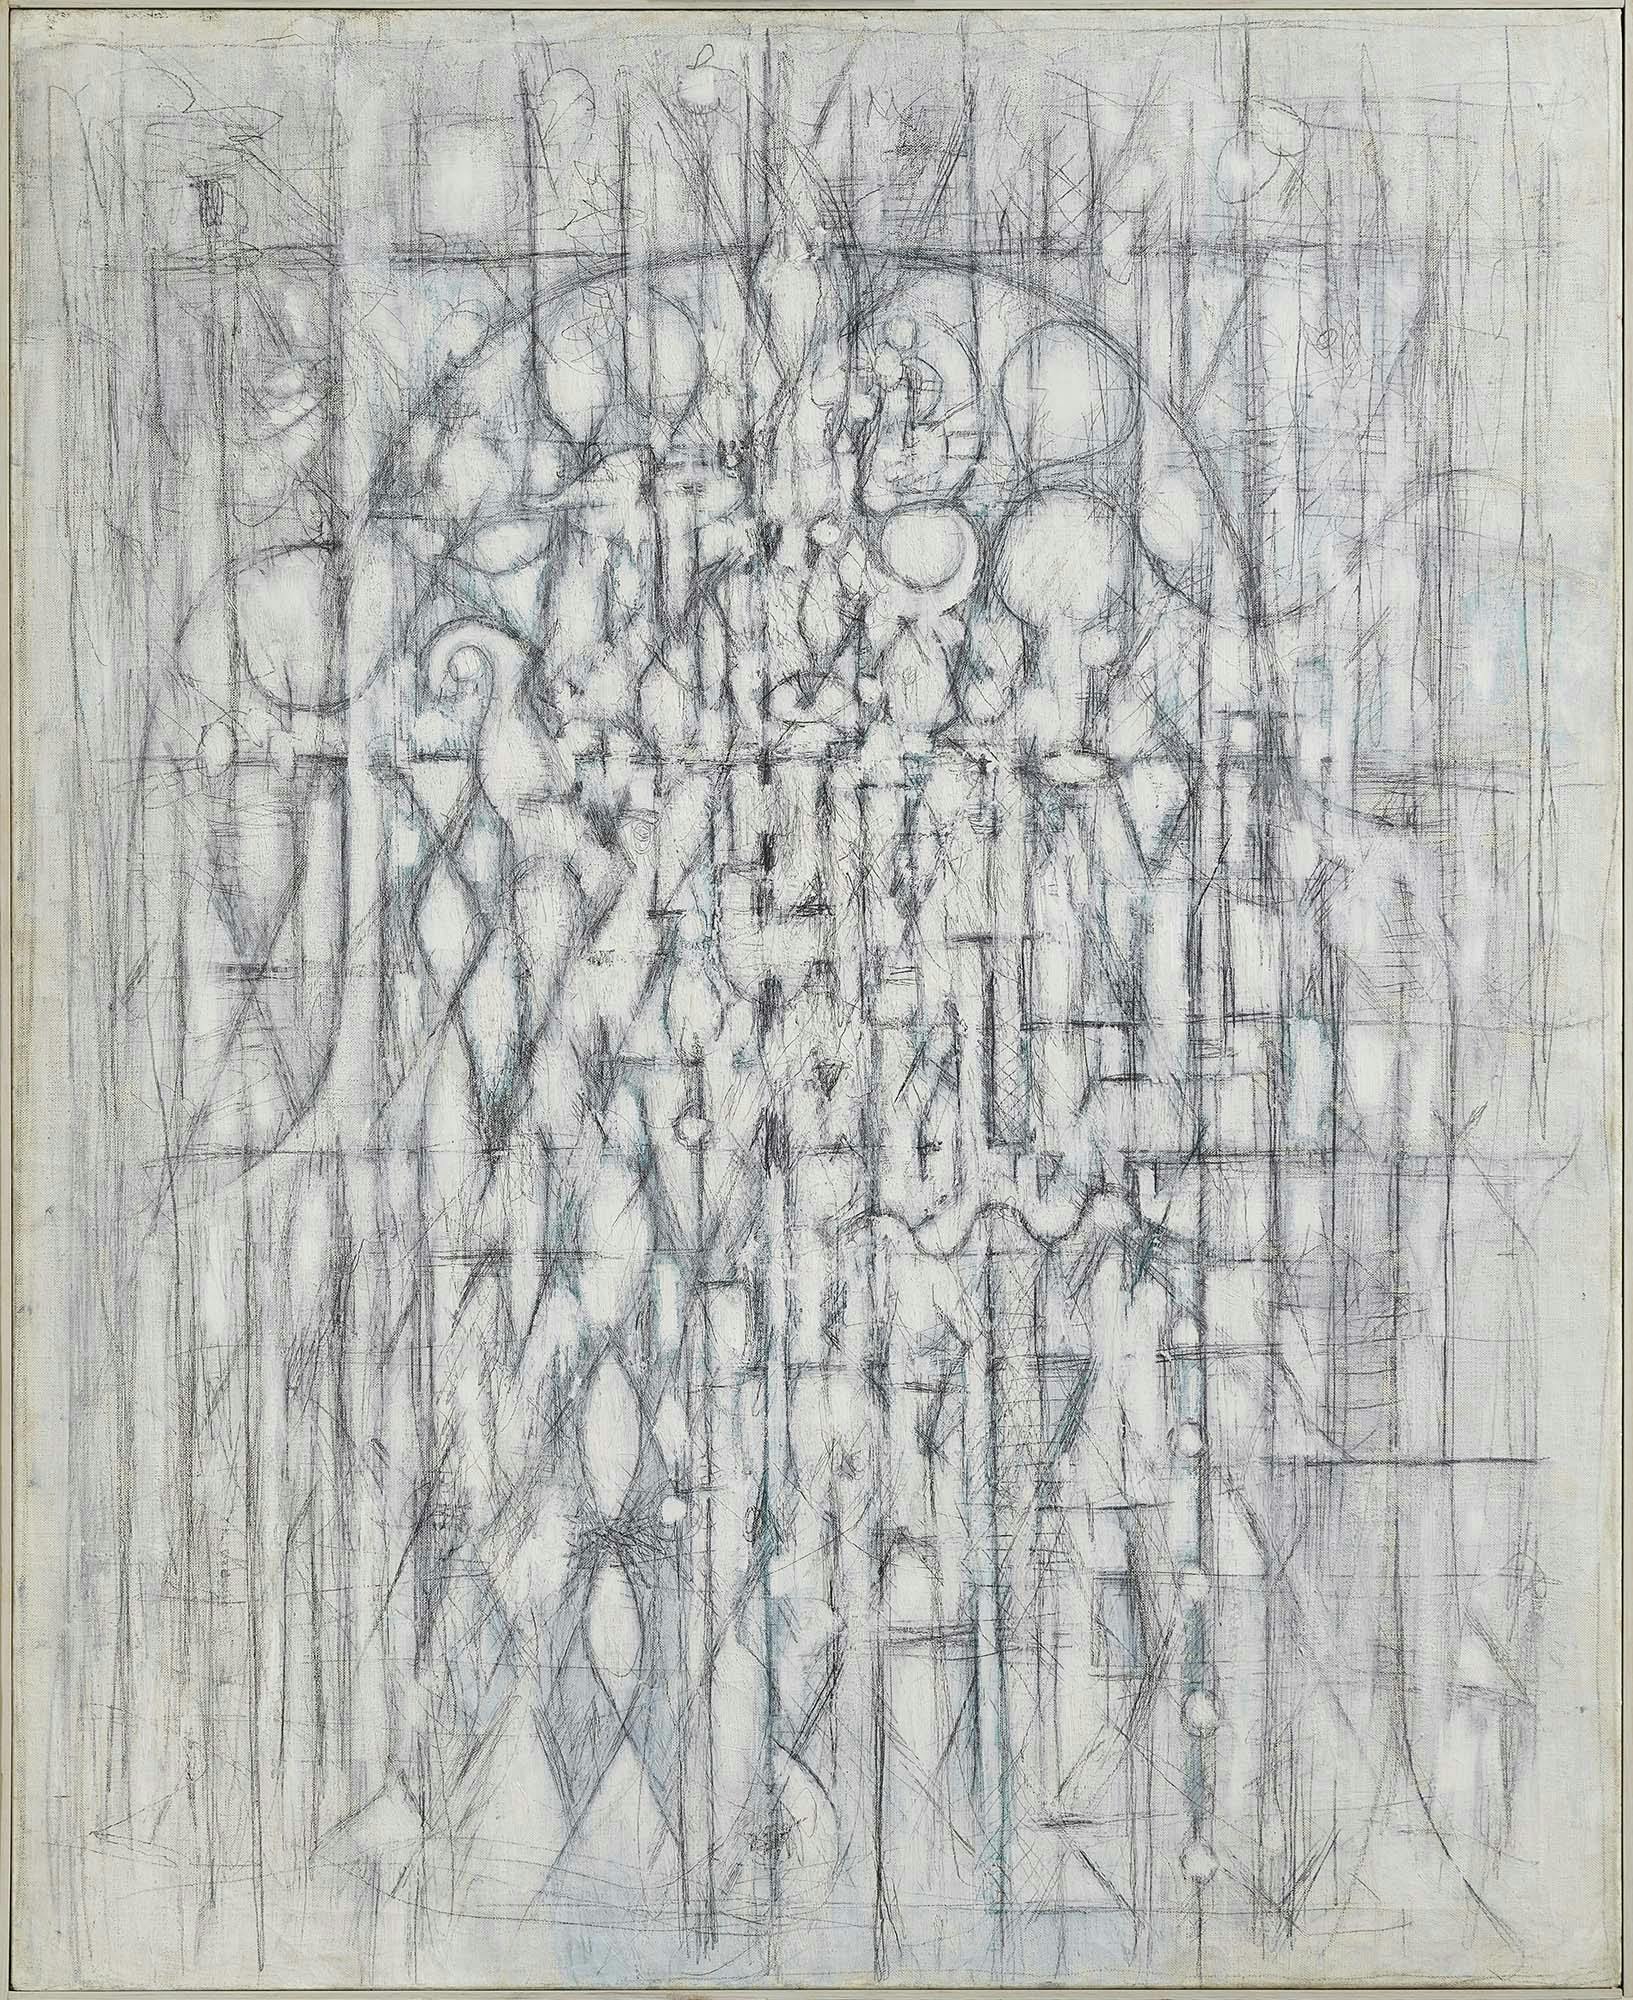 Head of a Poet
1950–51
Oil and graphite on linen
44 1/8 x 35 7/8 in. (112.1 x 91.1 cm)
 – The Richard Pousette-Dart Foundation